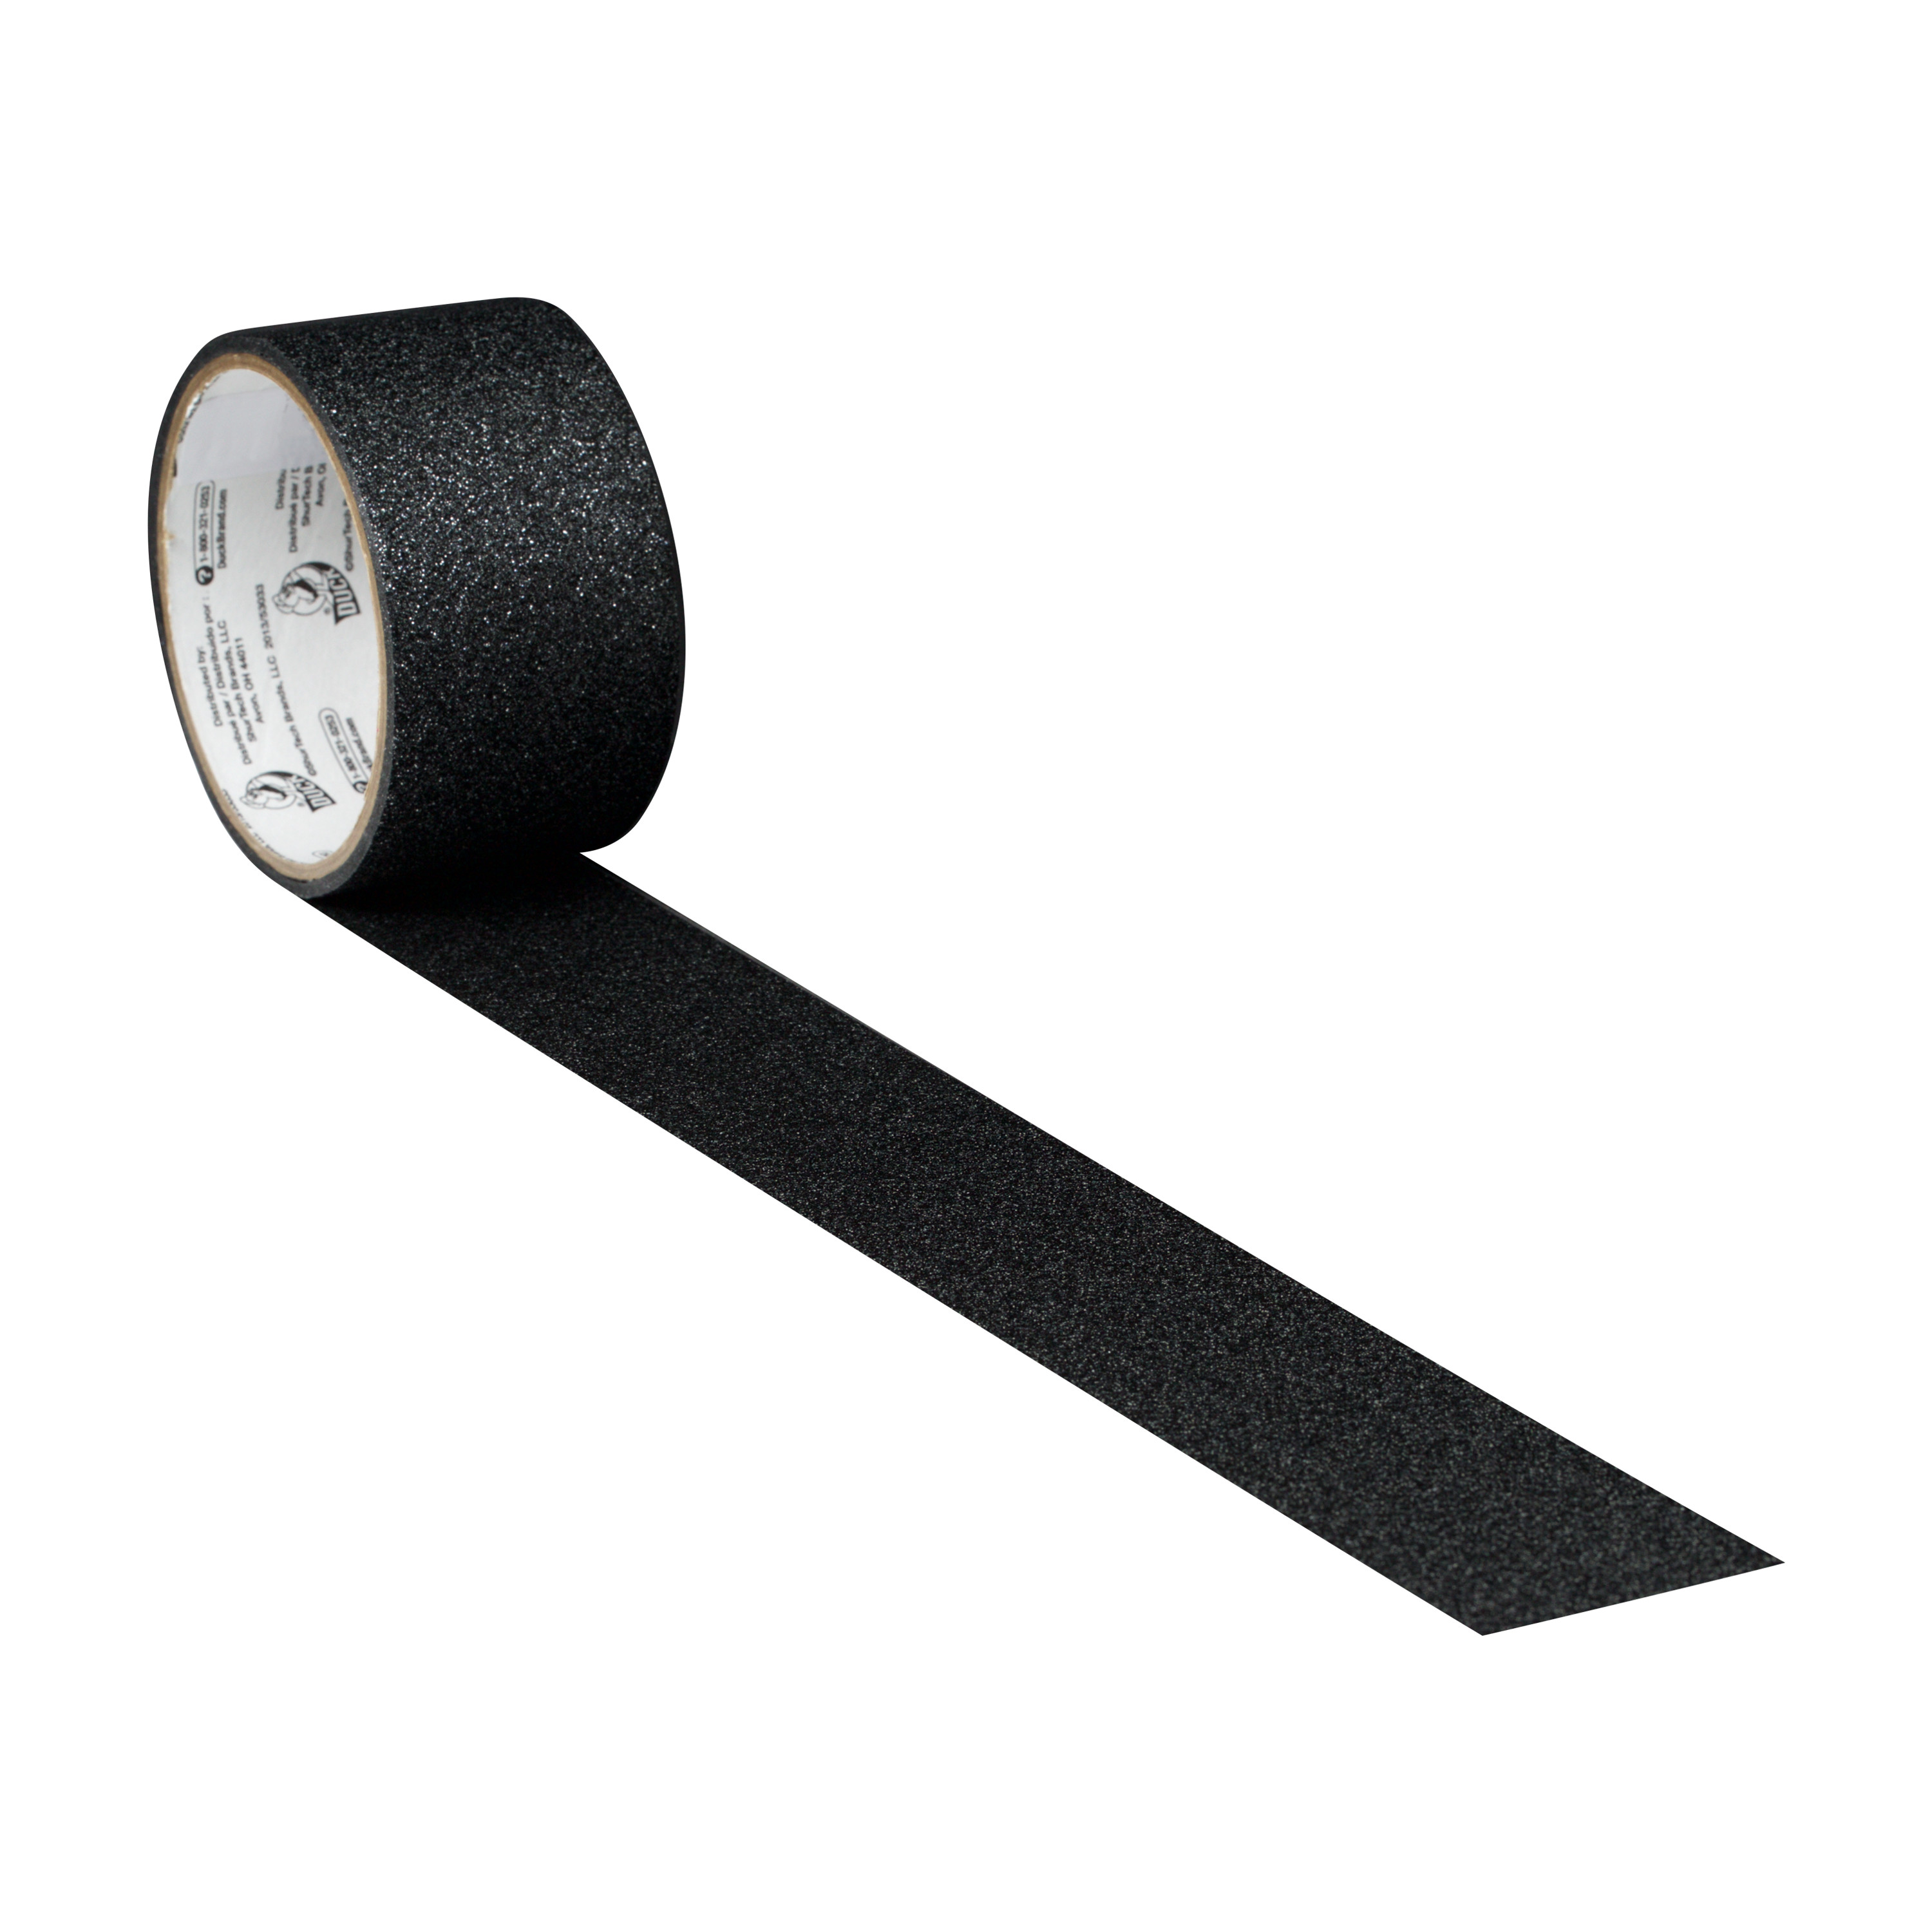 Black Masking Tape for Makers | 1 Roll 2 inch x 60 yd | Colored Tape by Bam! Tape for Stem Steam | Arts Crafts Science Math DIY | School Projects